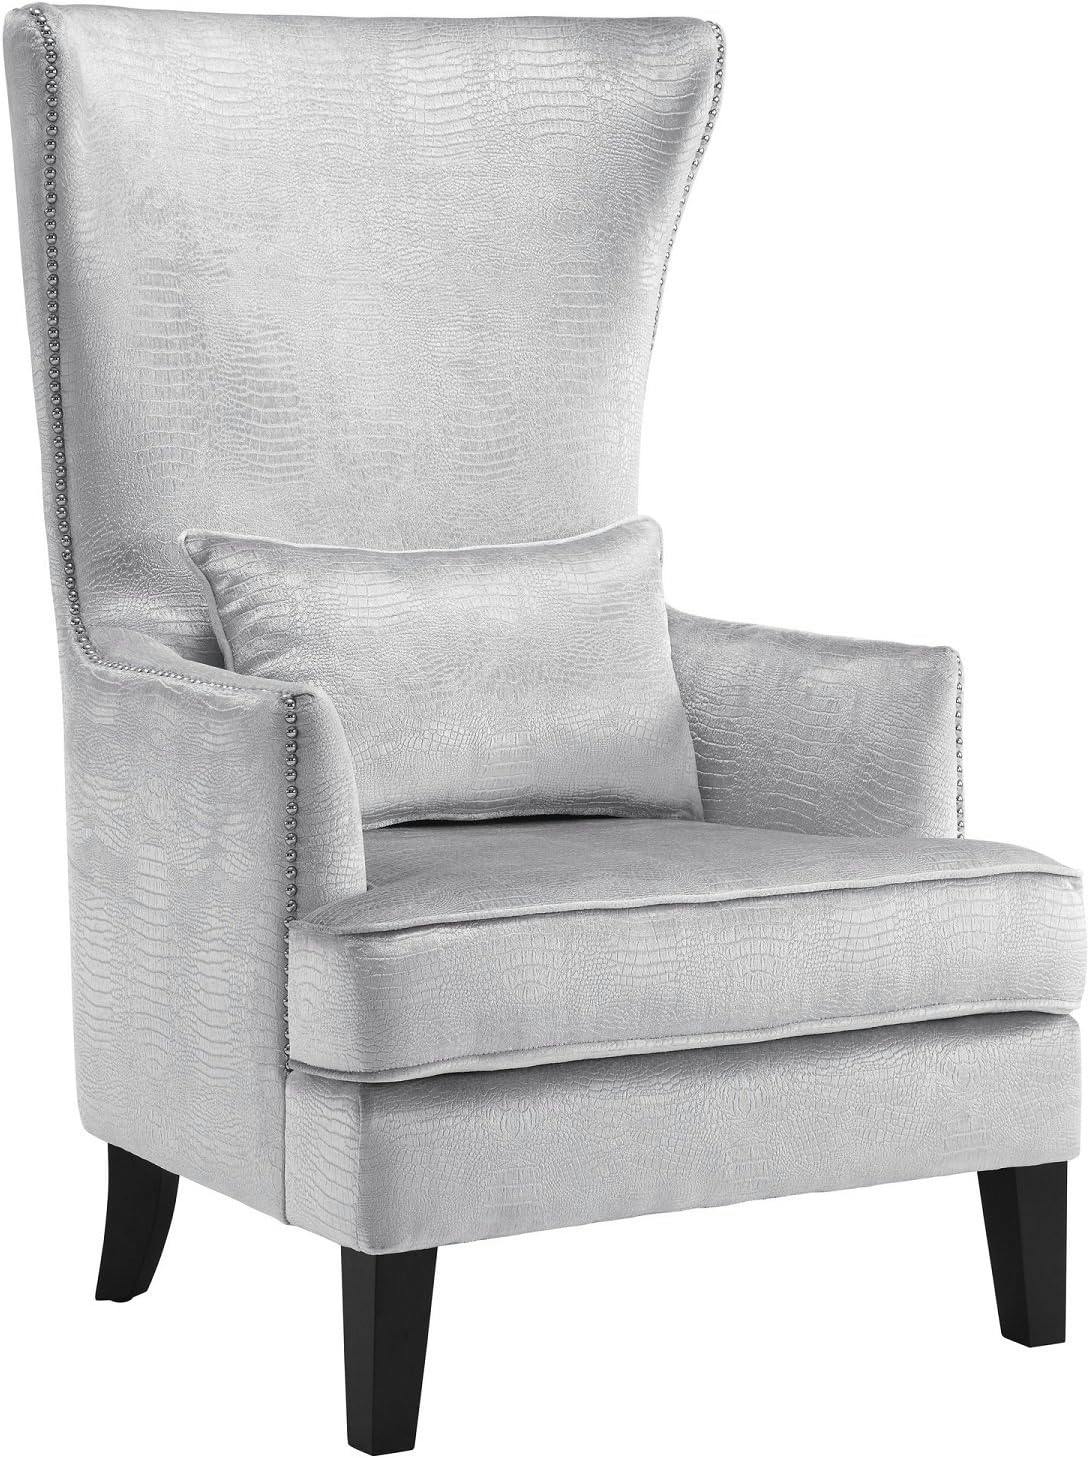 Silver Croc Velvet Wingback Accent Chair with Nailhead Trim